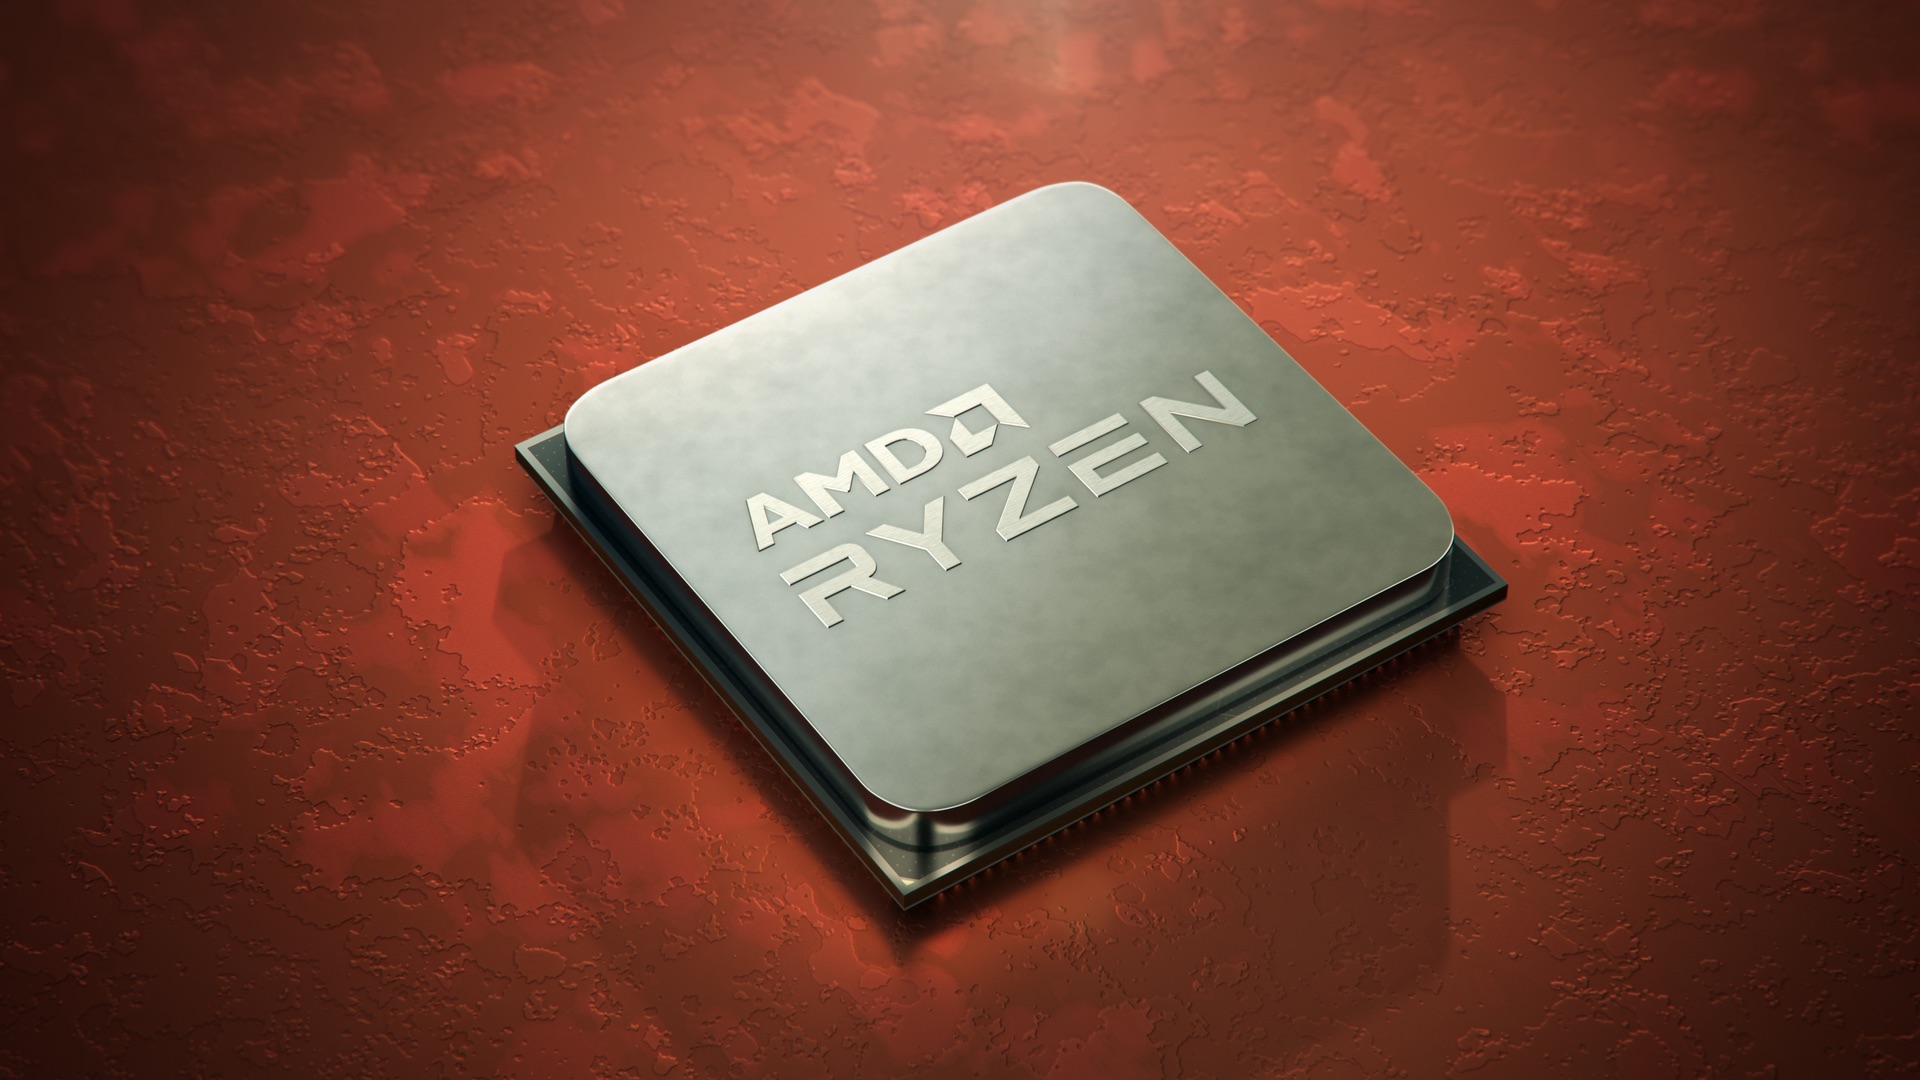 AMD's Ryzen 5 5600G can game at 100FPS without a GPU for $230 (Reg. $275)